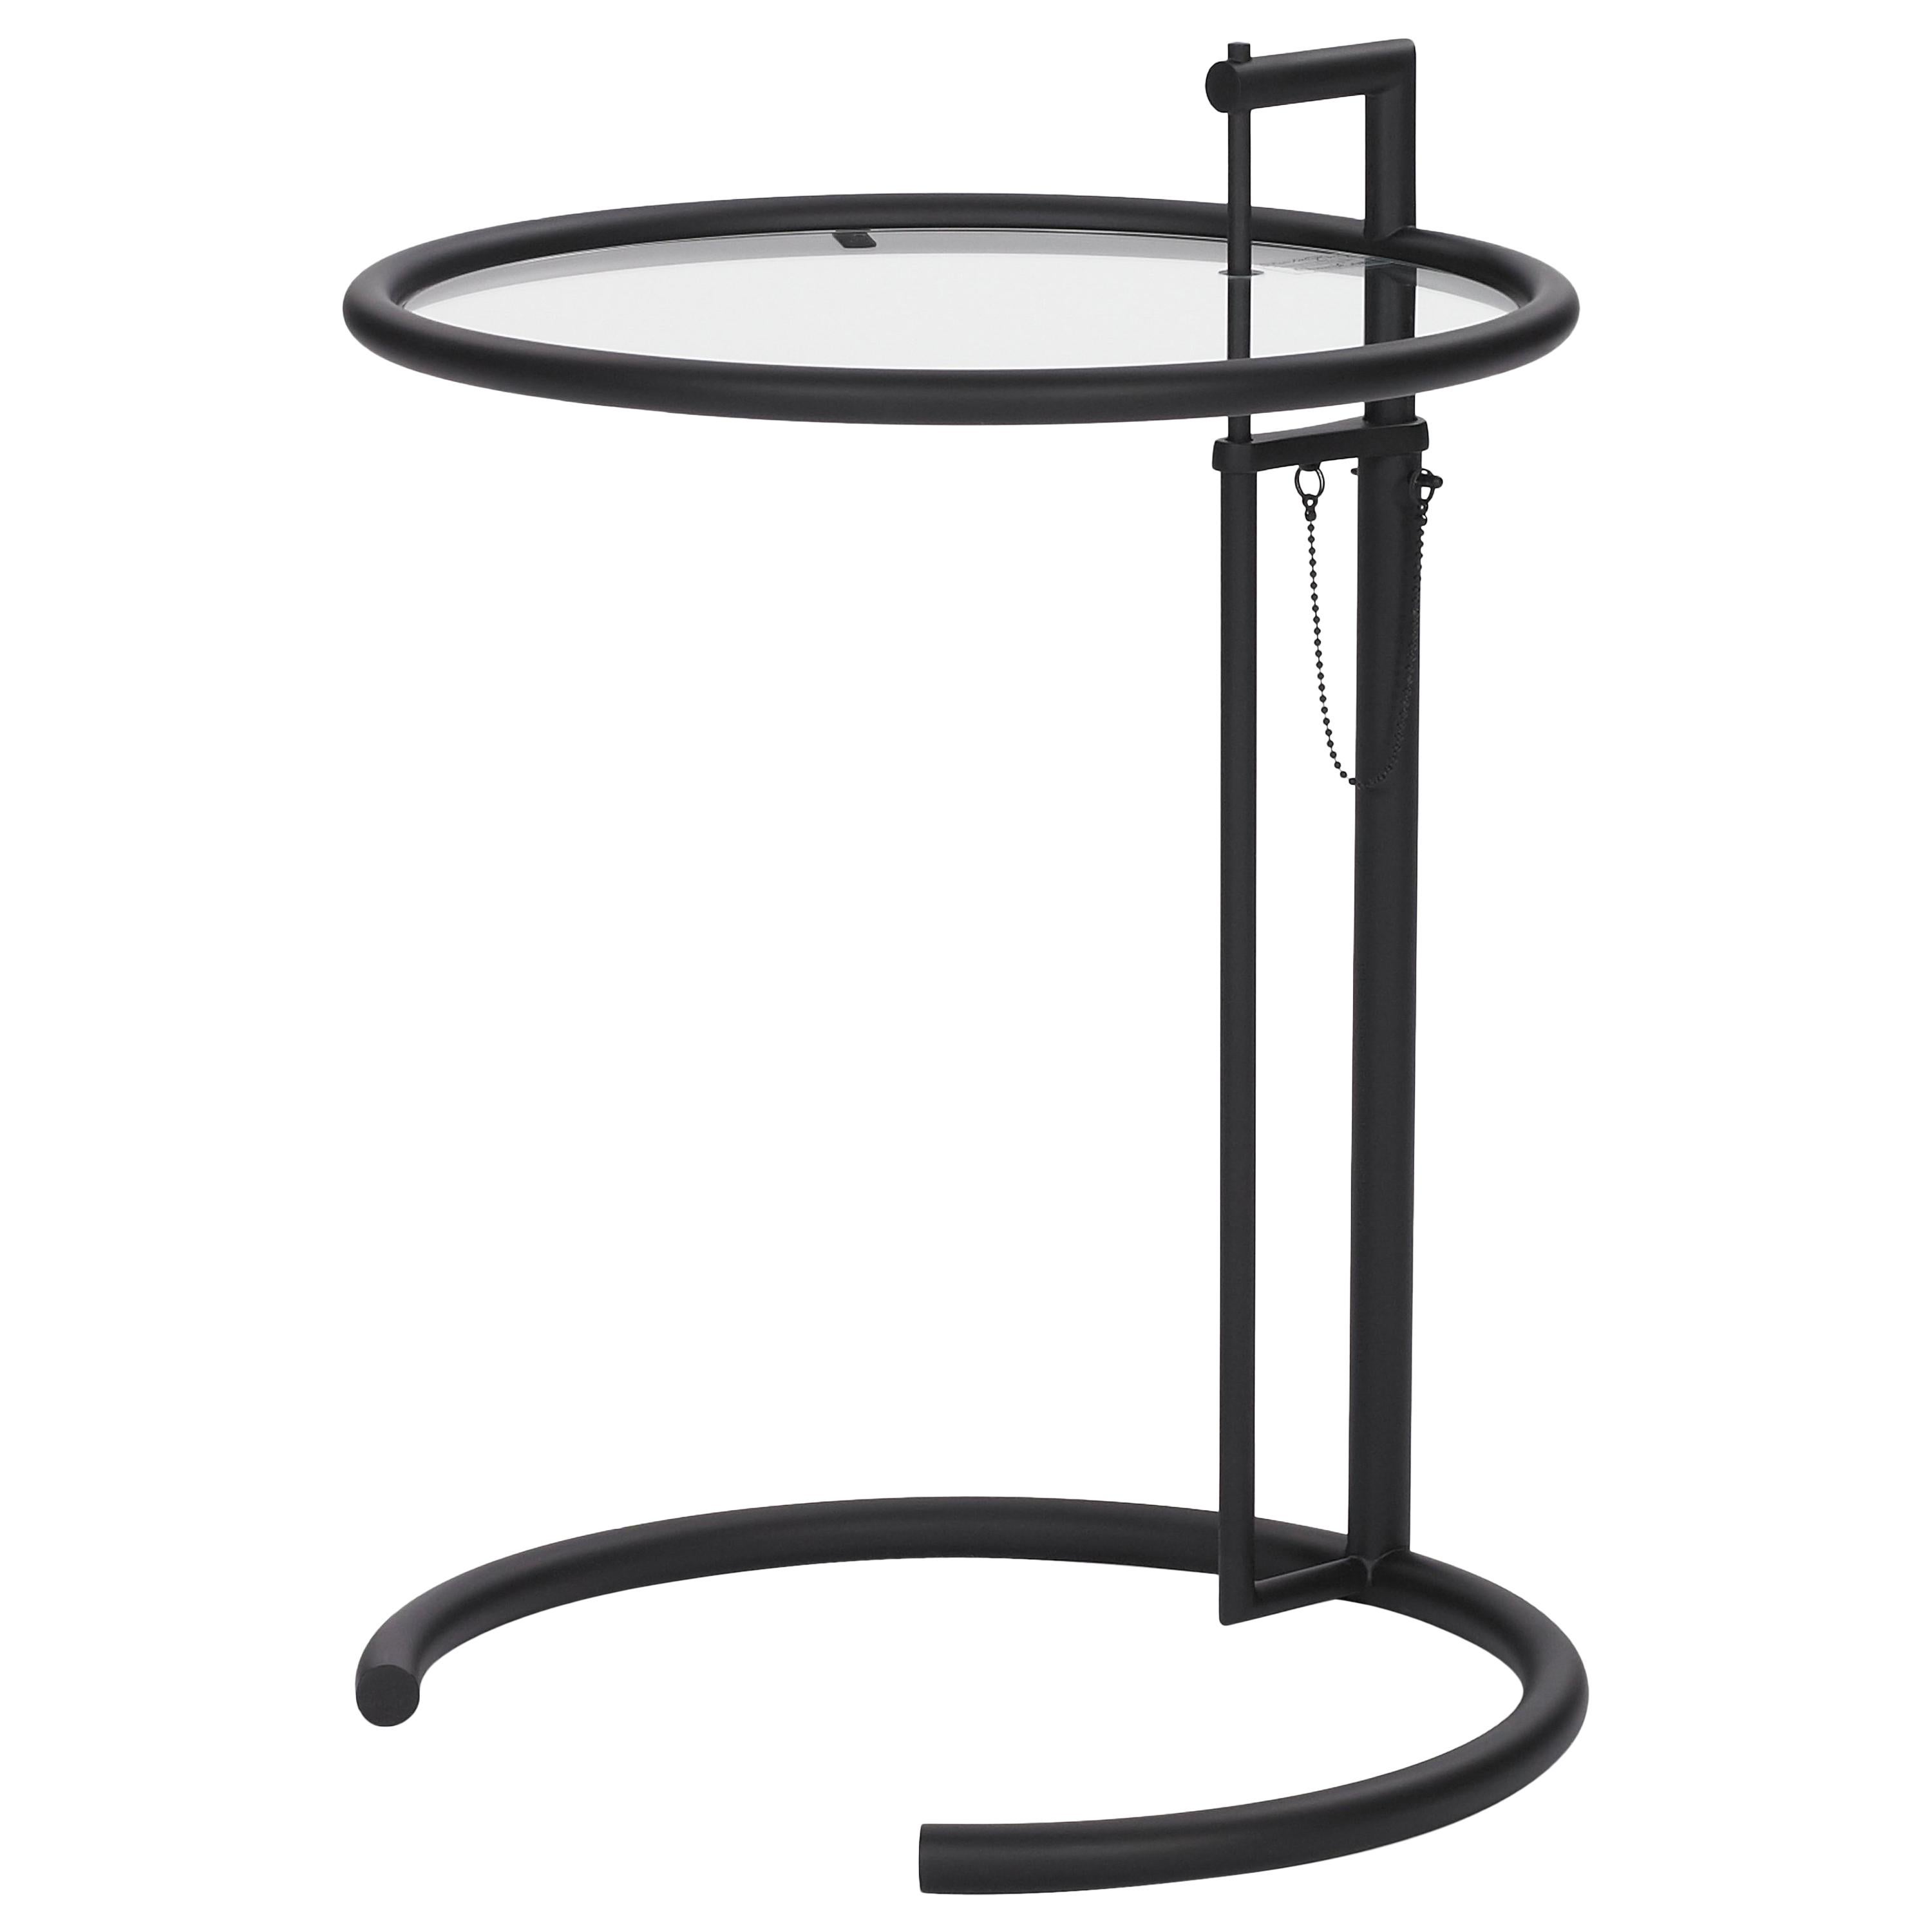 ClassiCon Adjustable Table E 1027 in Black and Crystal by Eileen Gray